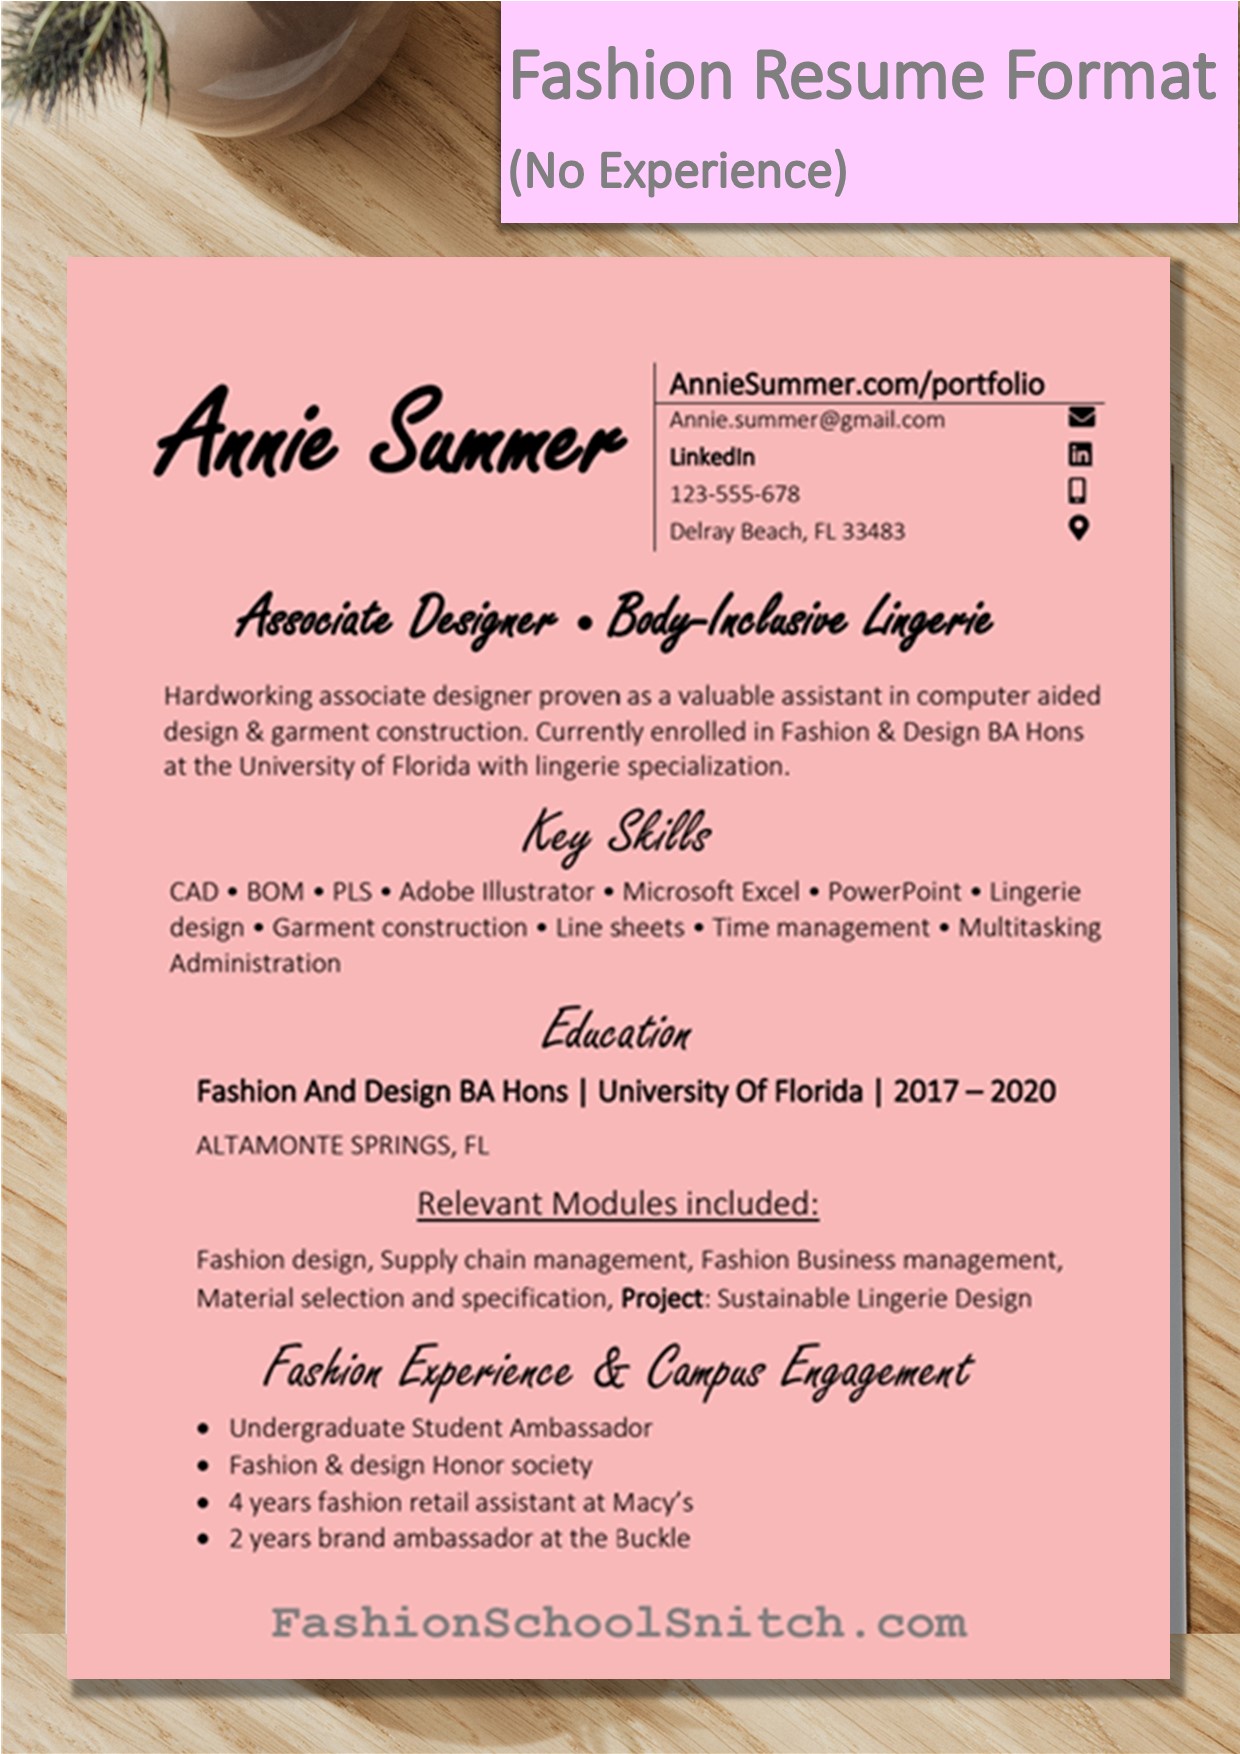 Sample: Fashion Designer resume format when you have relevant experience